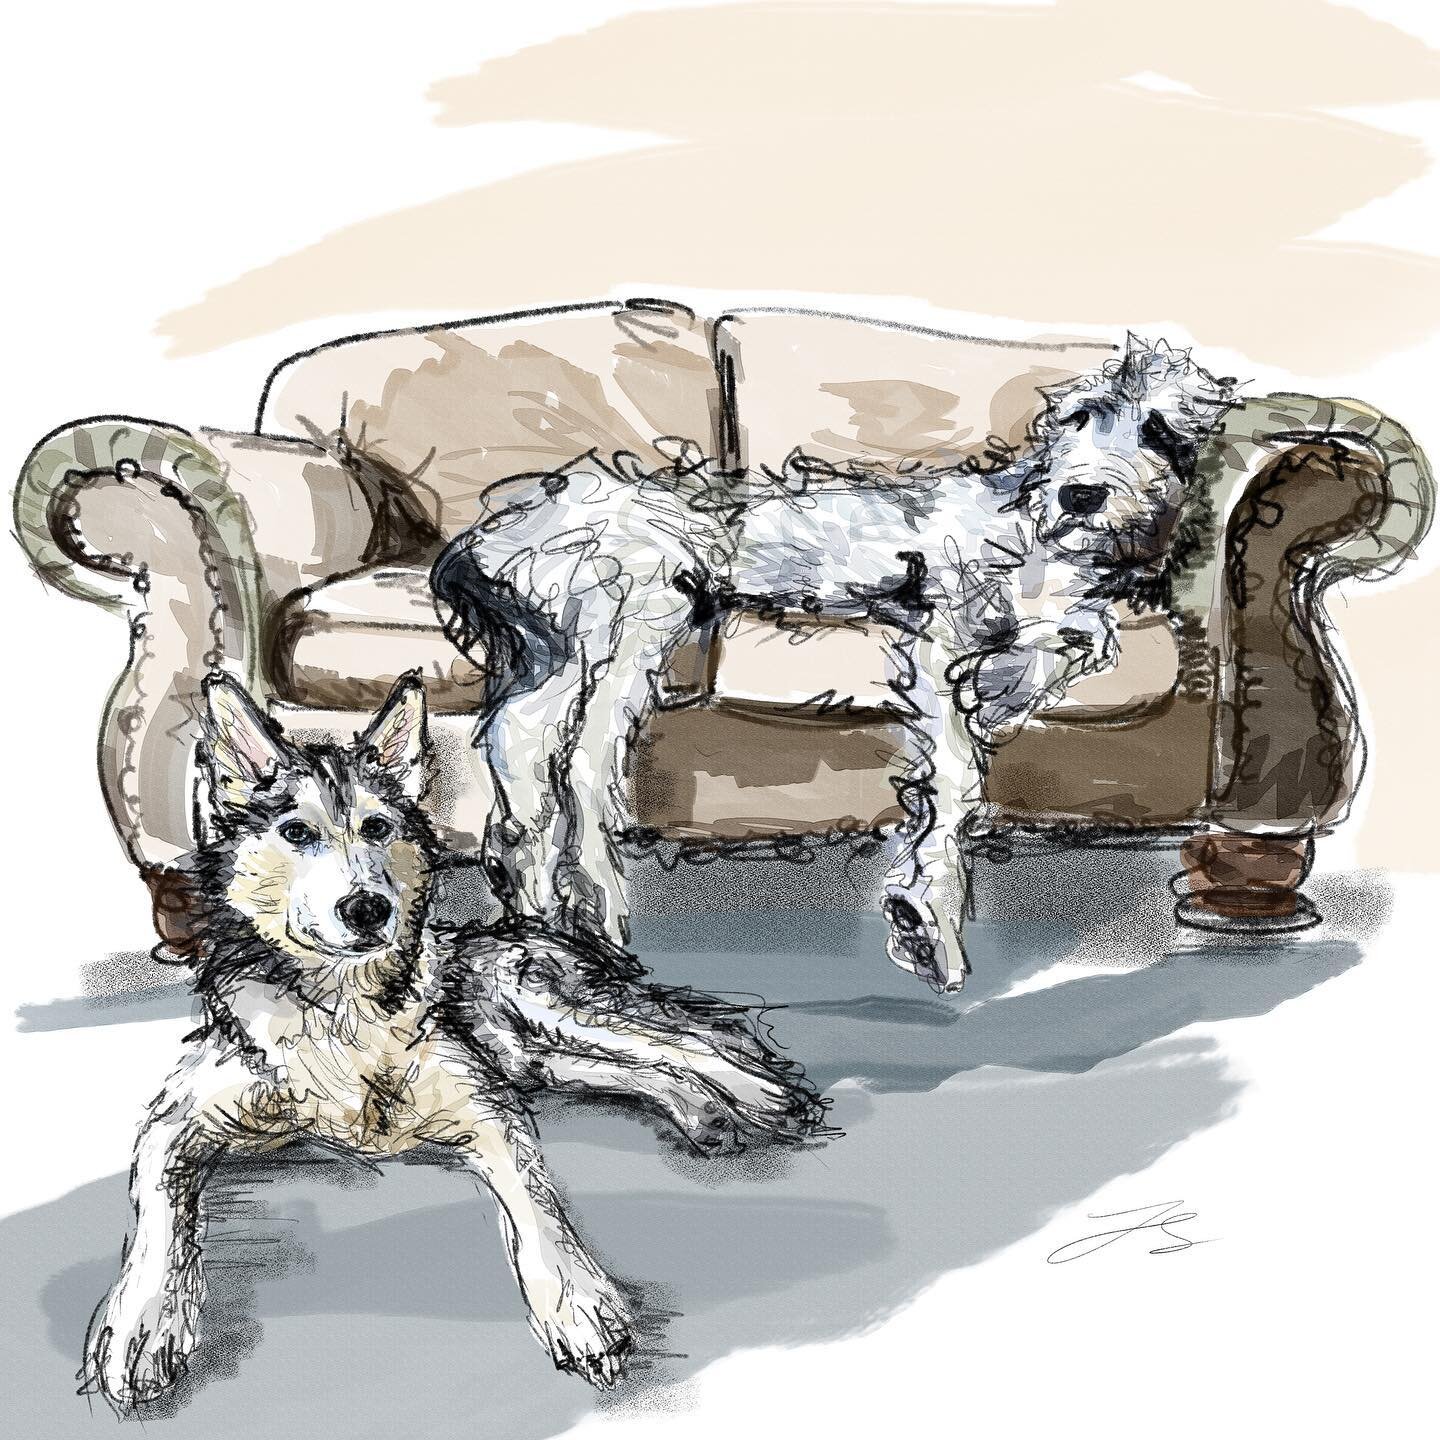 Day 28 of @dogsinaugust is the Irish wolfhound
And day 29 is the Siberian husky

Nearly done! The challenge is almost complete

#artyismymiddlename #doggust #doggust2023 #petfamily #dogdrawings #dogpictures #animalillustration #petportraitartist #dog